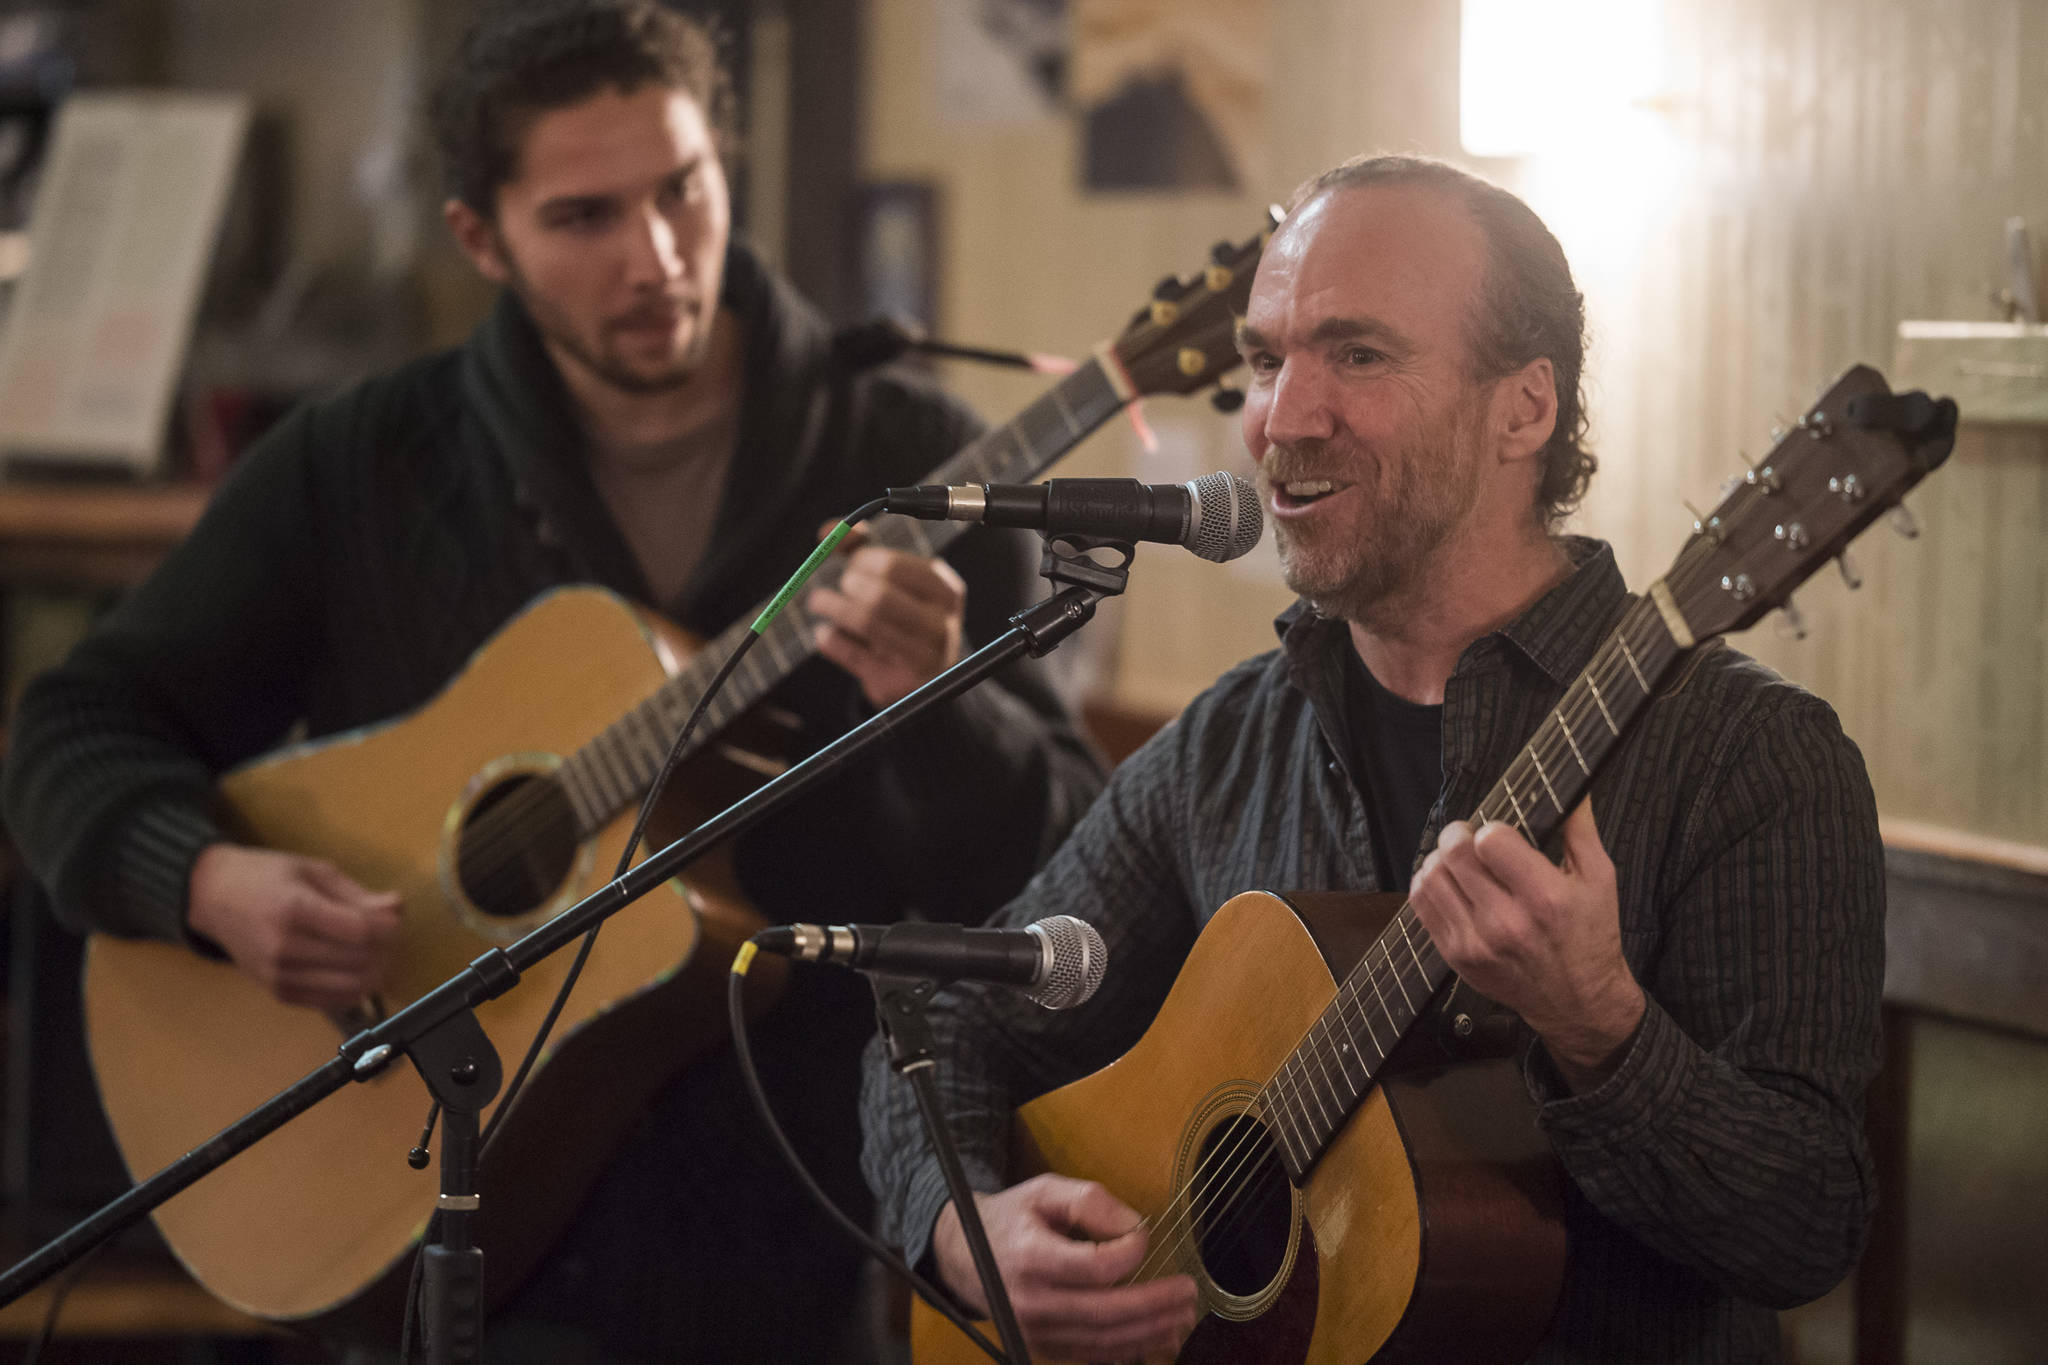 Dave Albert, right, is backed up by Avery Stewart during his two-song set at the Mountainside Open Mic & Art Night at The Rookery on Oct. 31, 2018. (Michael Penn | Capital City Weekly File)